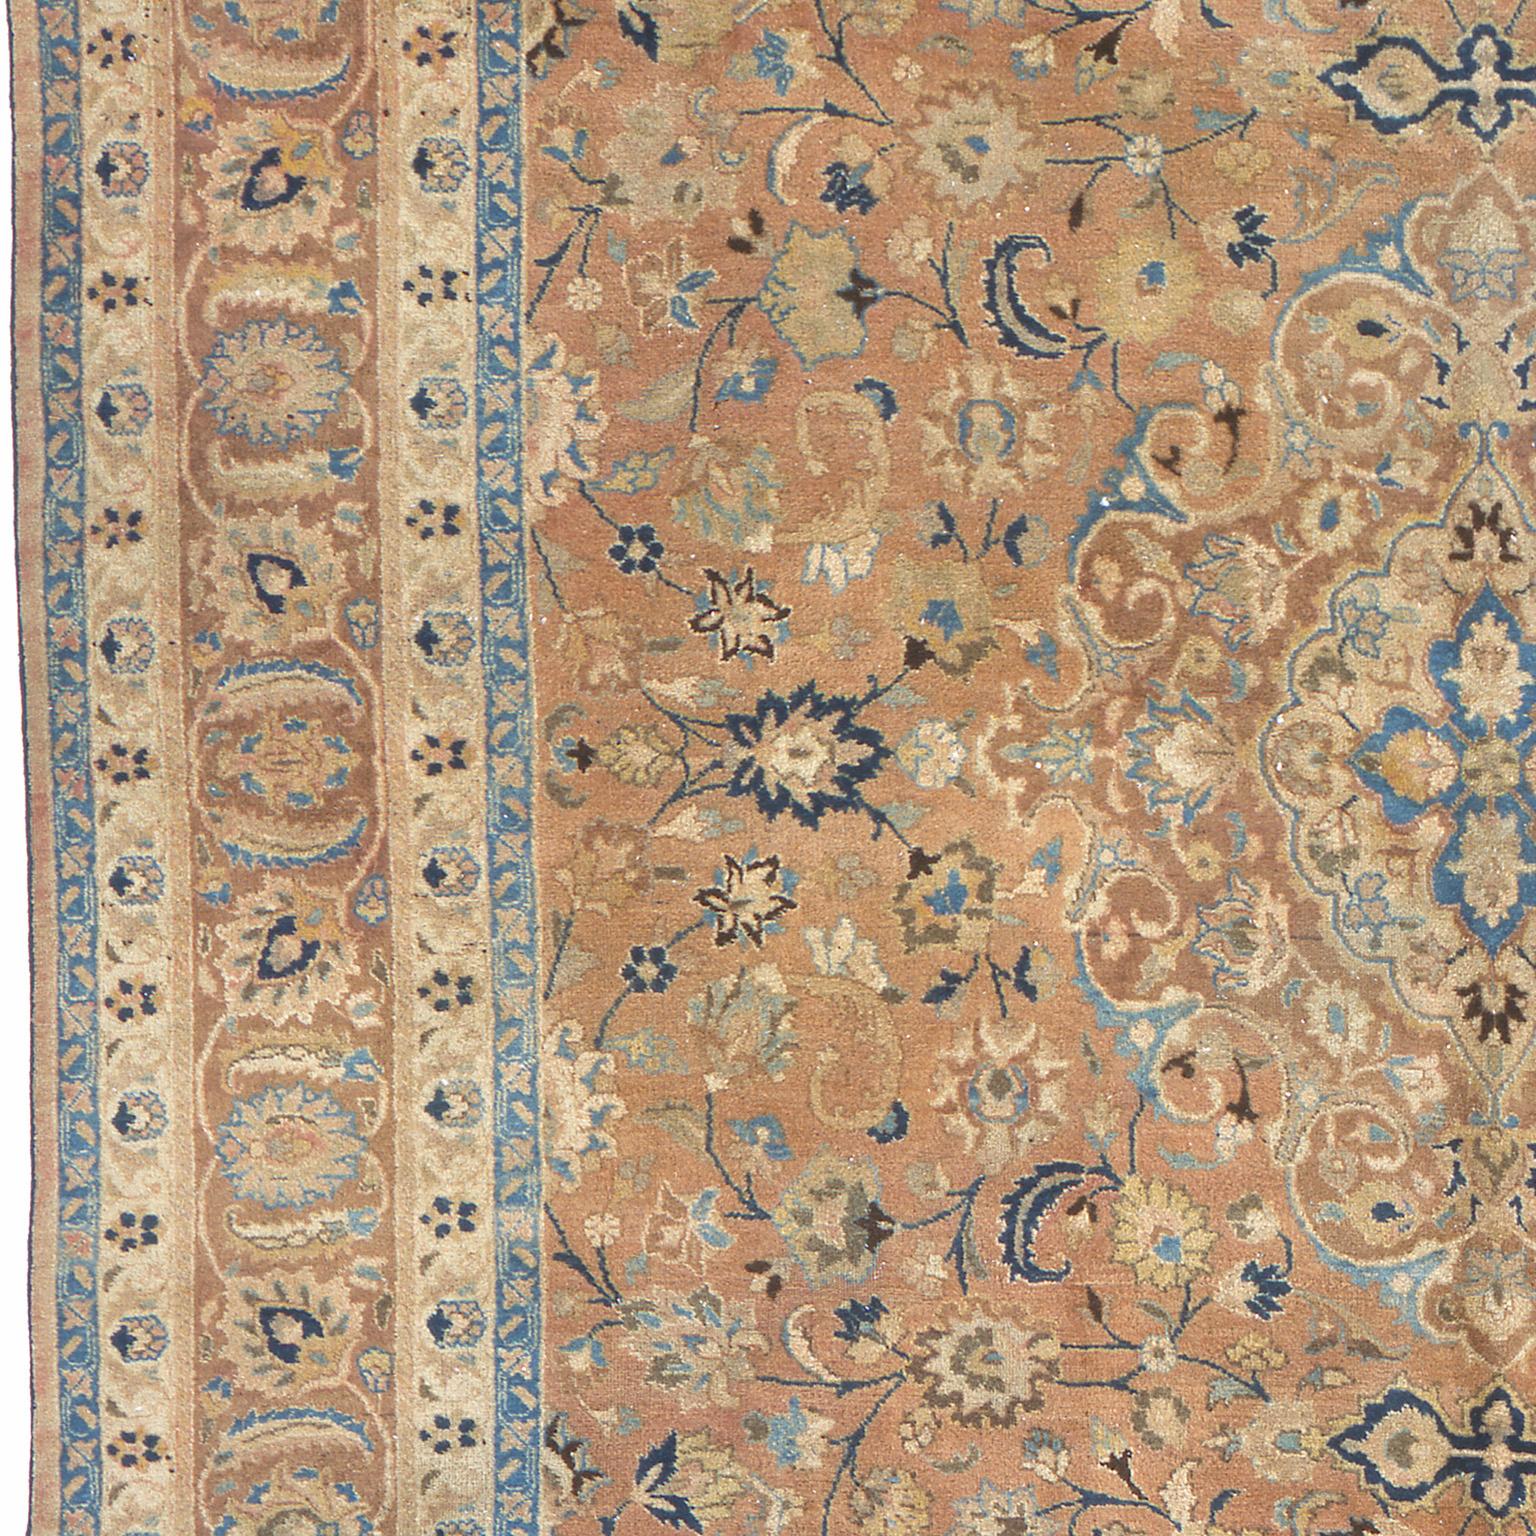 Early 20th Century Persian Tabriz Rug In Good Condition For Sale In New York, NY